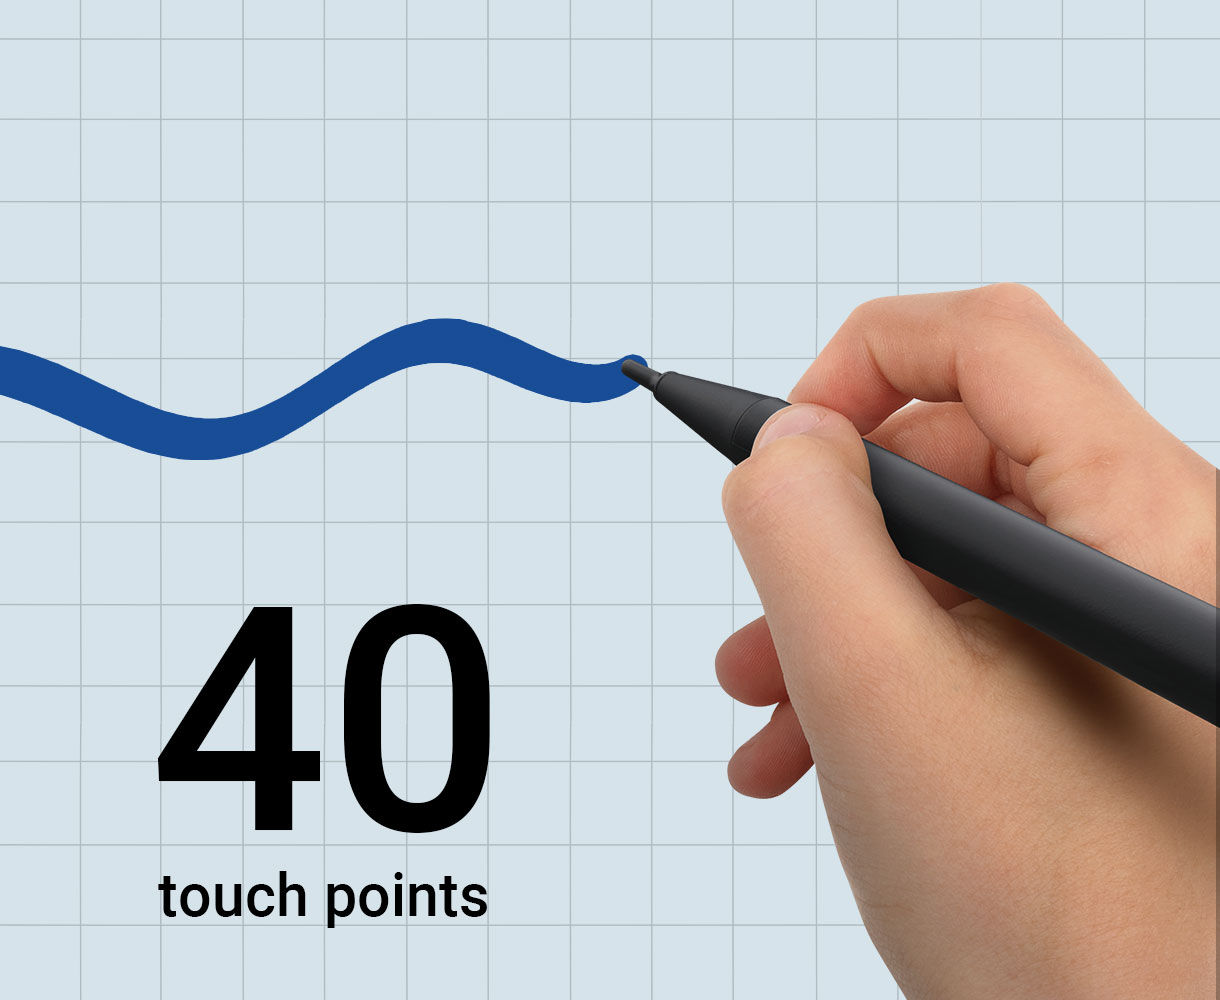 BenQ Board Essential Series 40 touch points